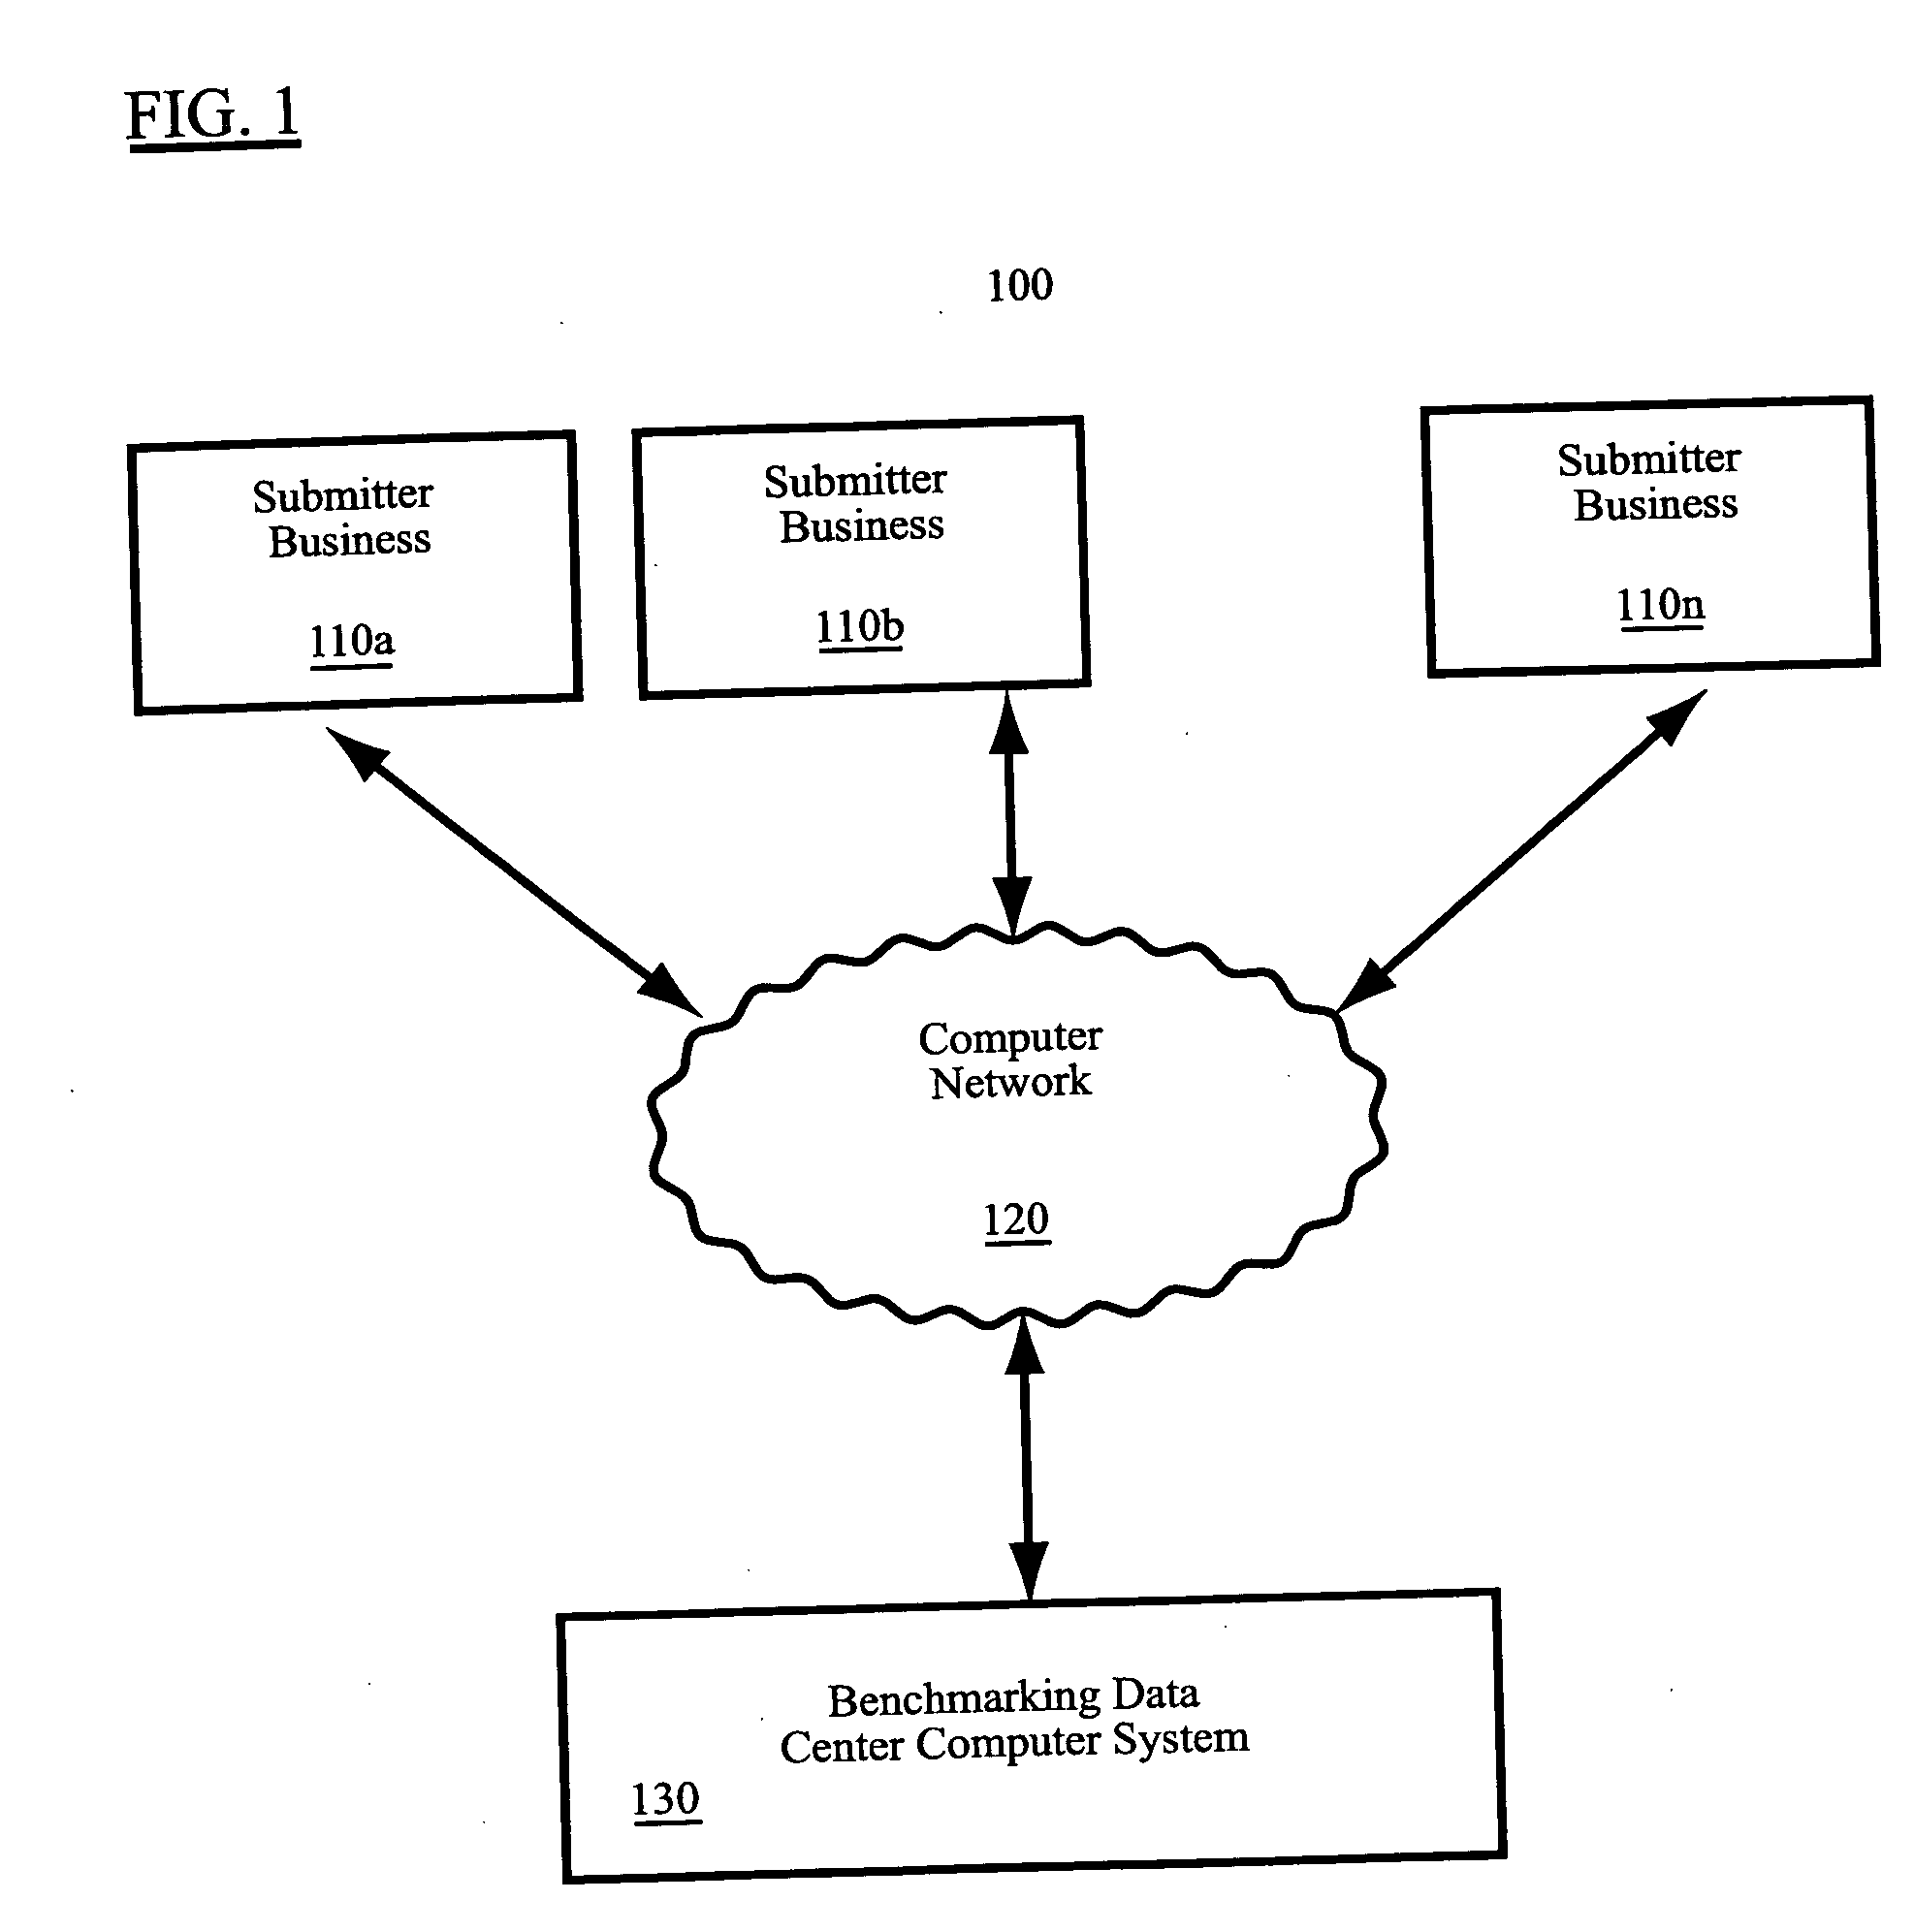 Systems and methods for benchmarking business performance data against aggregated business performance data